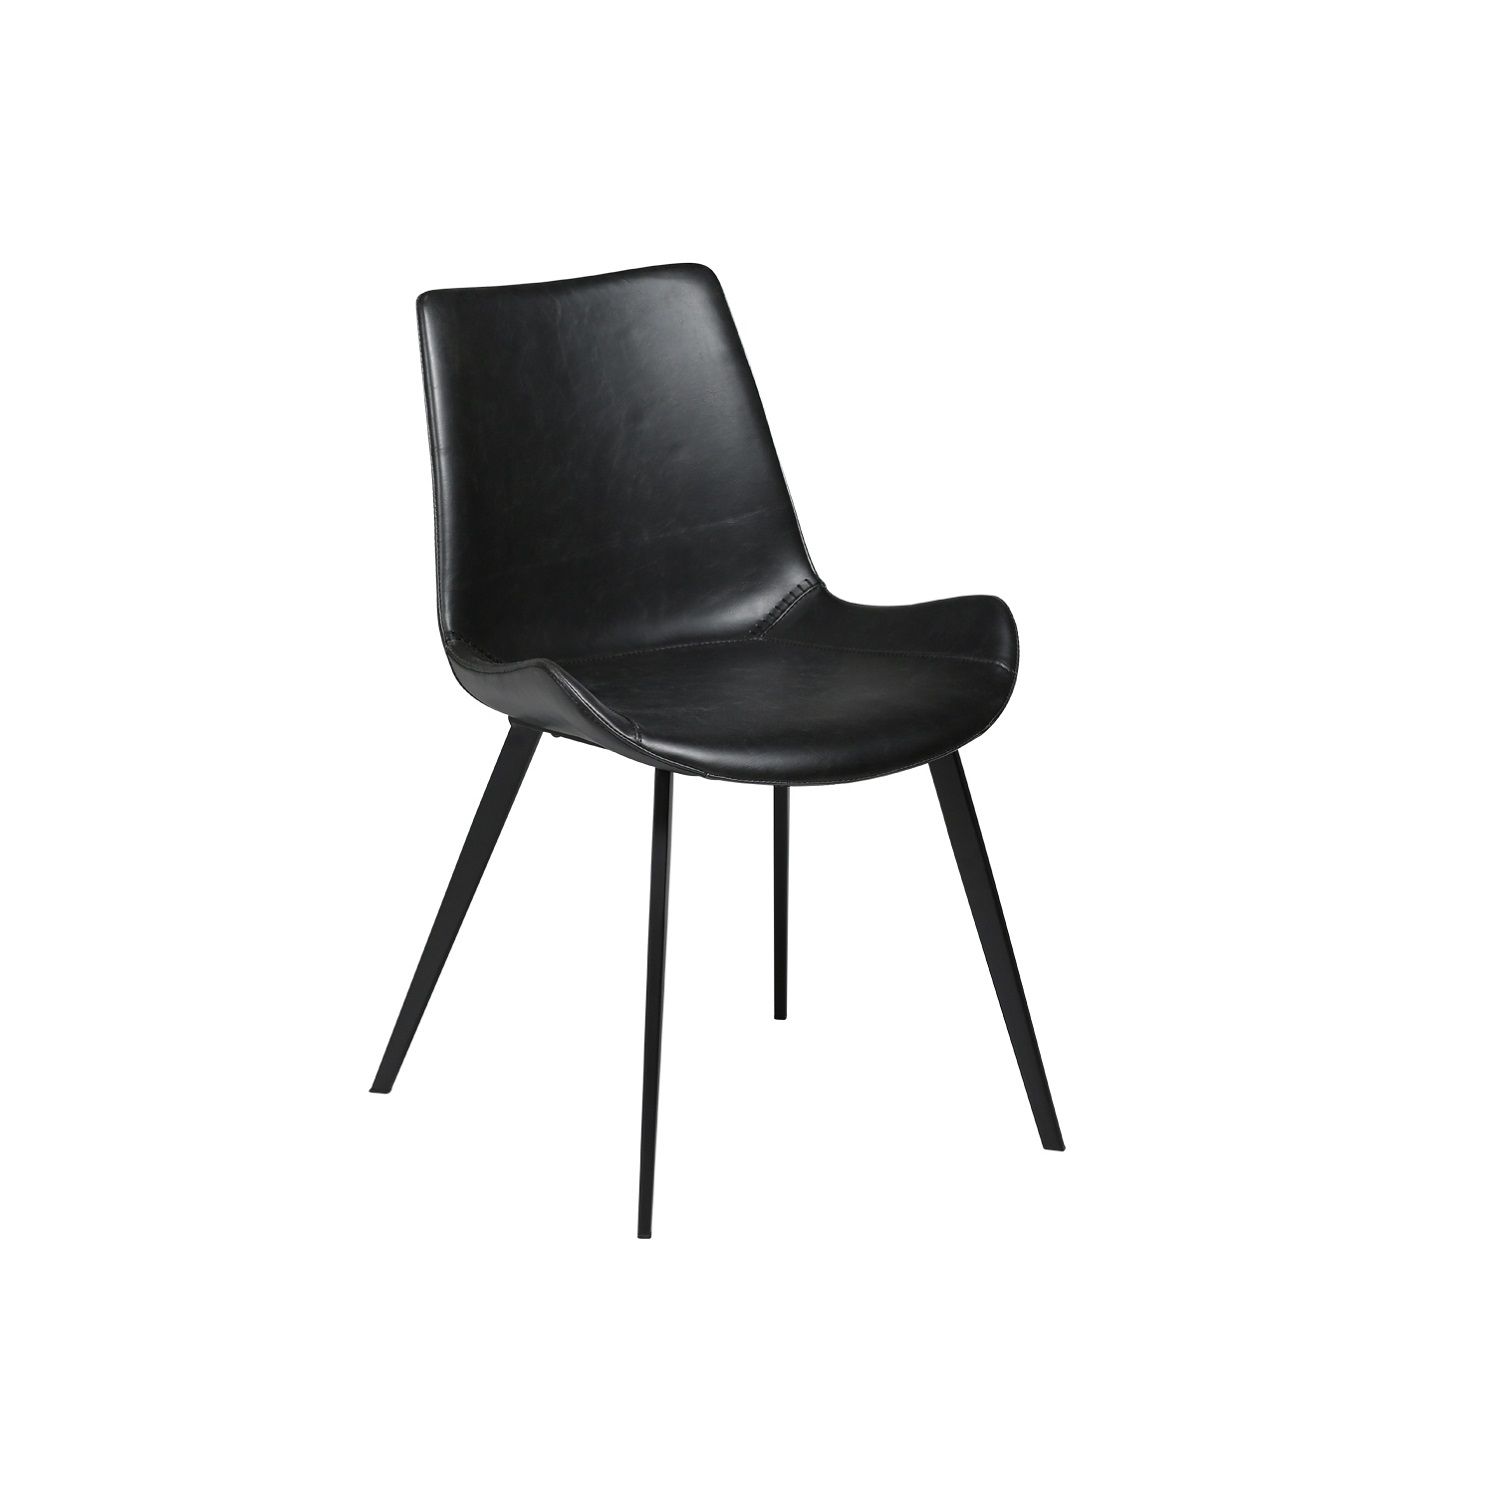 POGBA Dining Chair